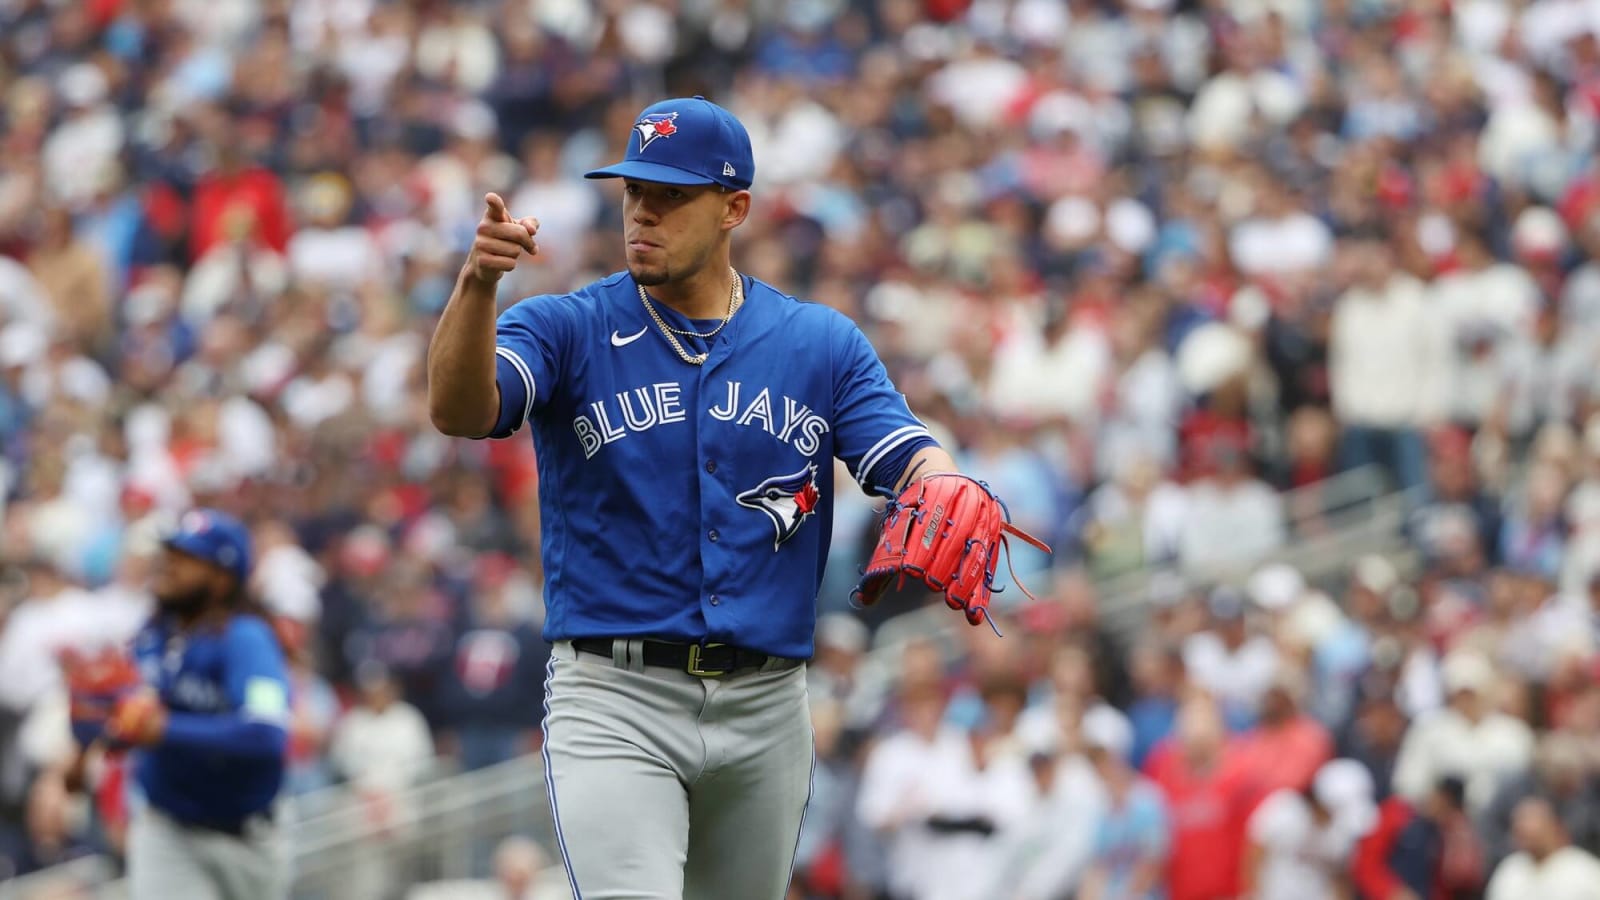 The Blue Jays robbed José Berríos of one of the biggest starts of his career